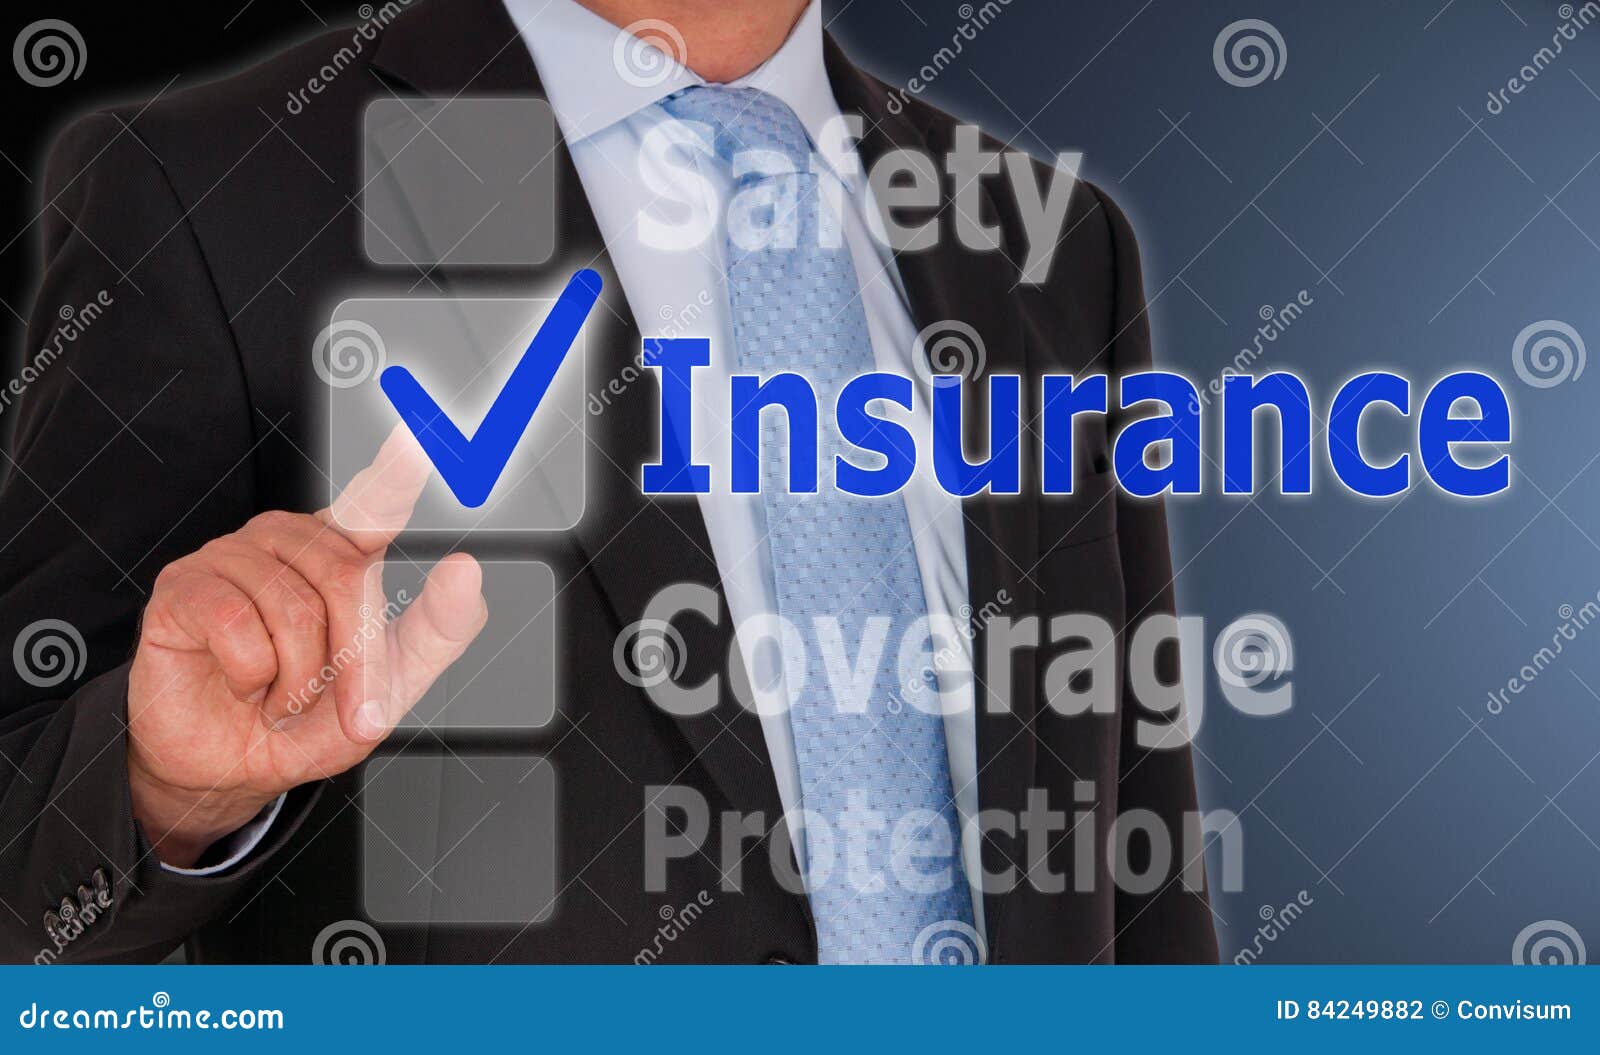 Insurance Safety Coverage Protection Stock Photo - Image of crime, coverage: 84249882